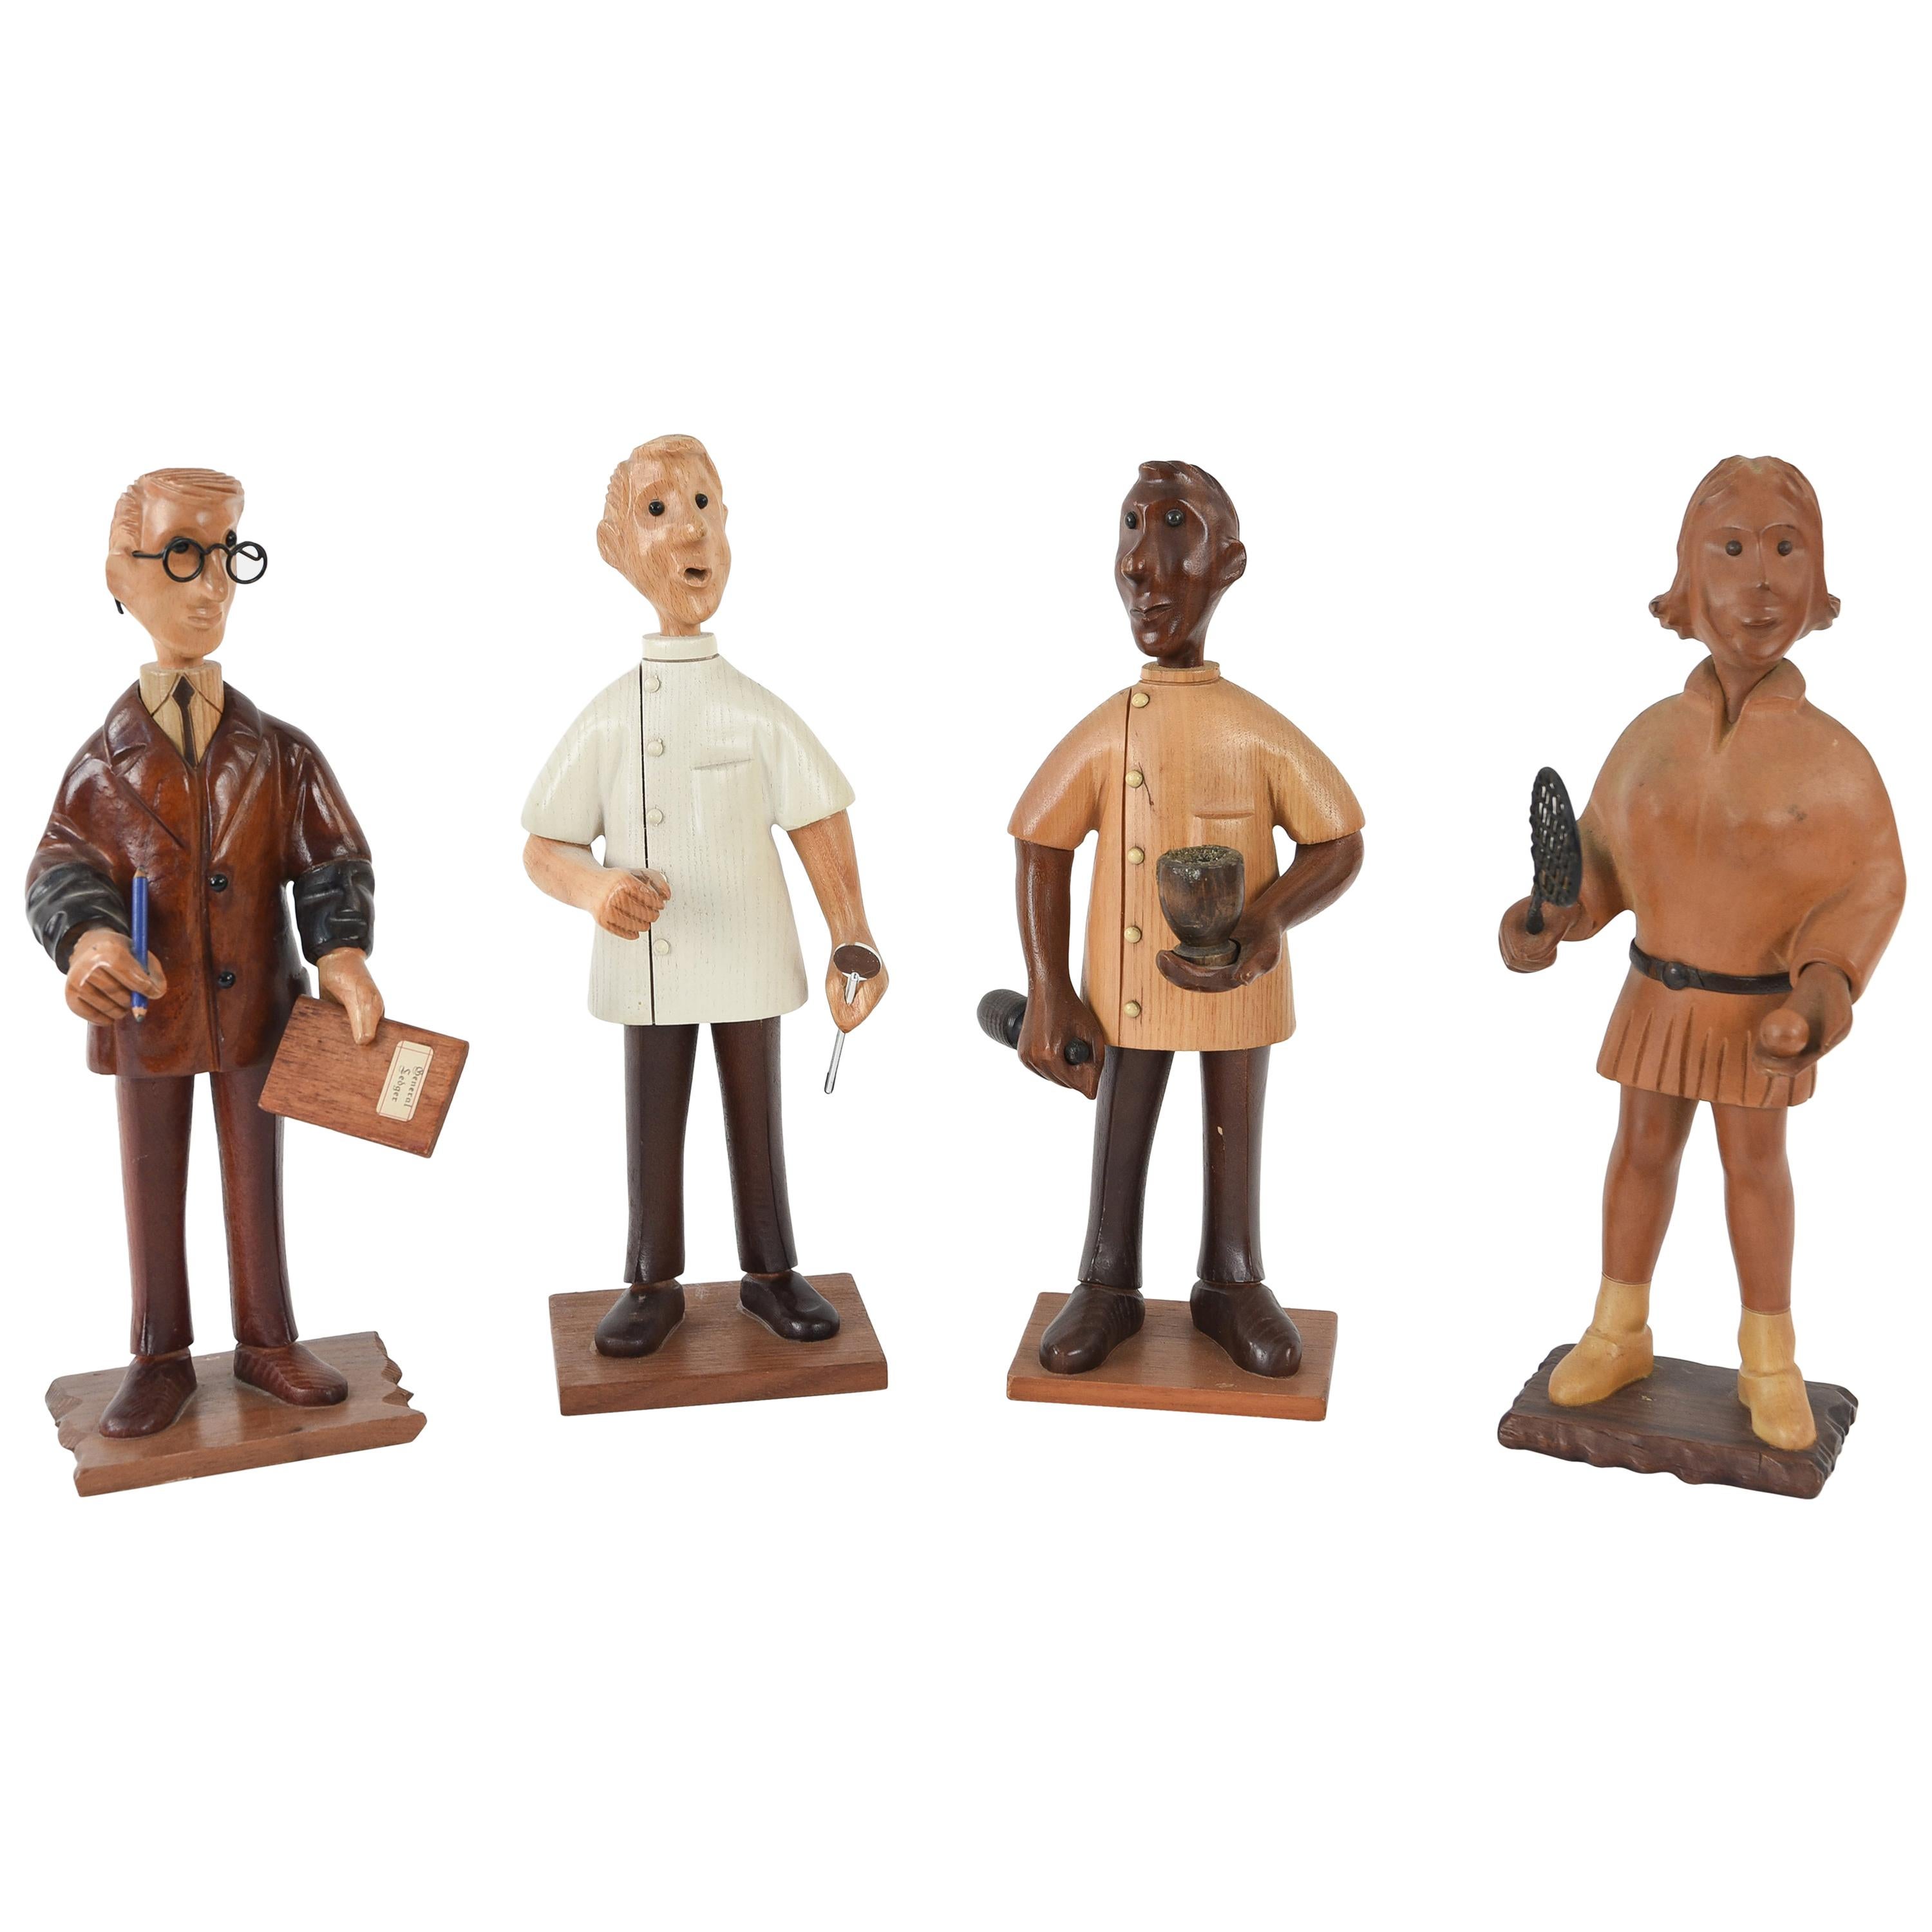 Four Italian Hand-Carved Wooden Occupational Figures